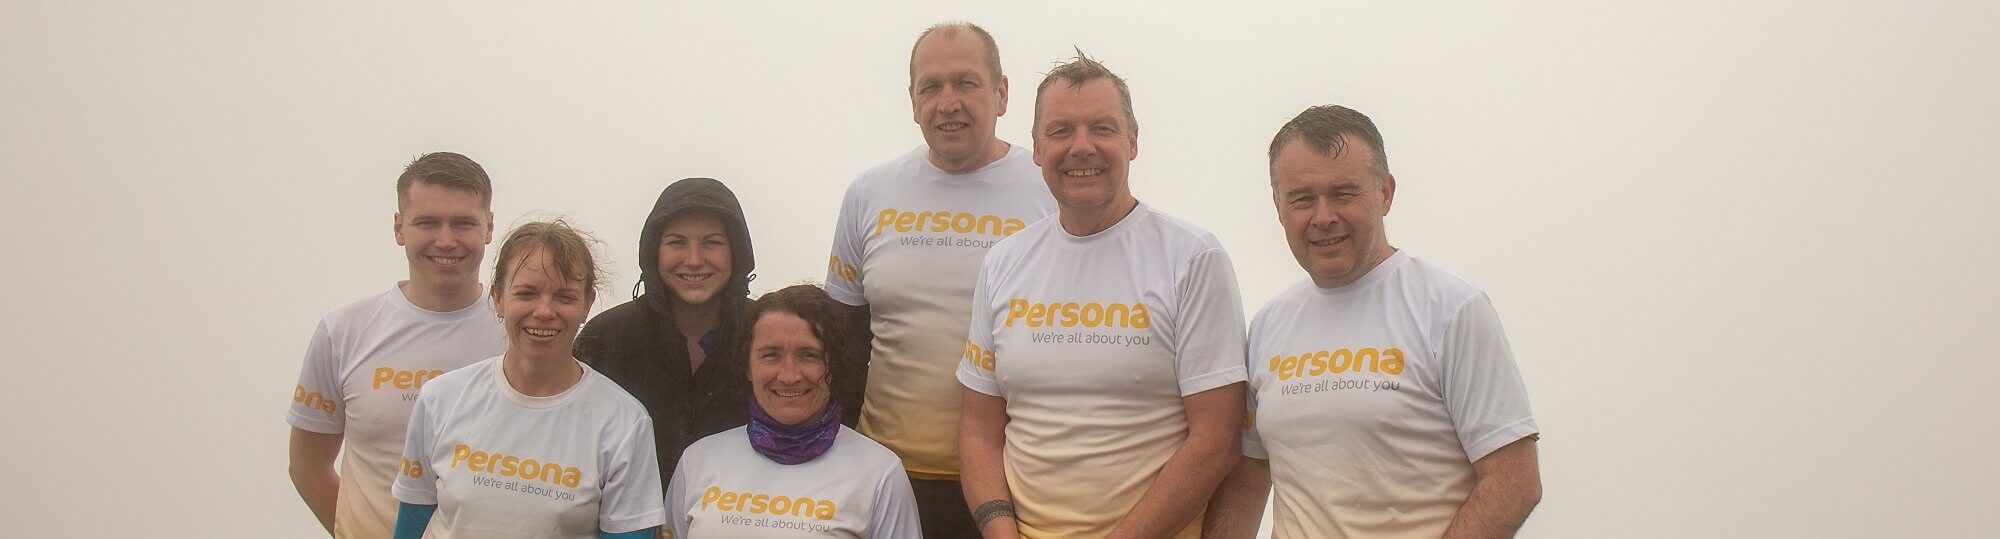 Persona Wellbeing: We climbed Snowdon!